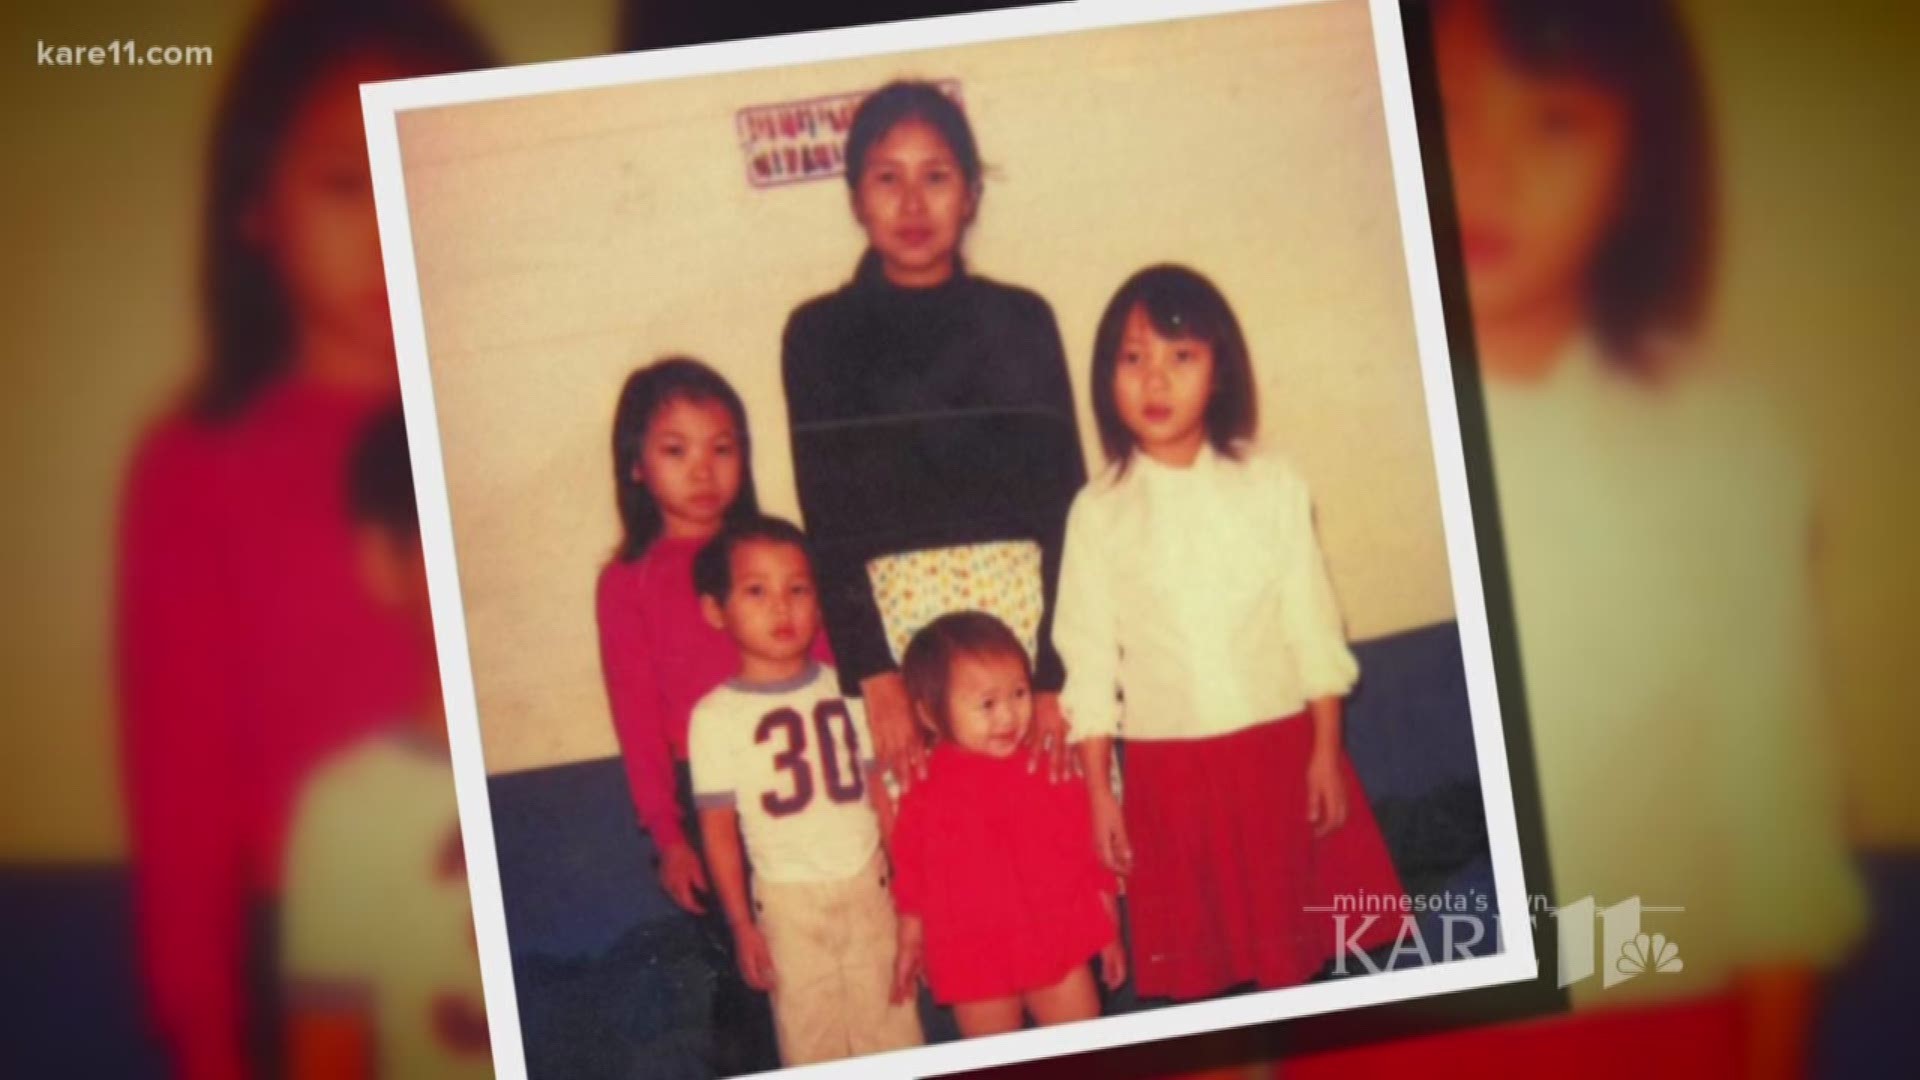 The Coalition of Asian American Leaders is calling on all Asian Minnesotans to share their stories from the past or present. http://kare11.tv/2IlXNKw